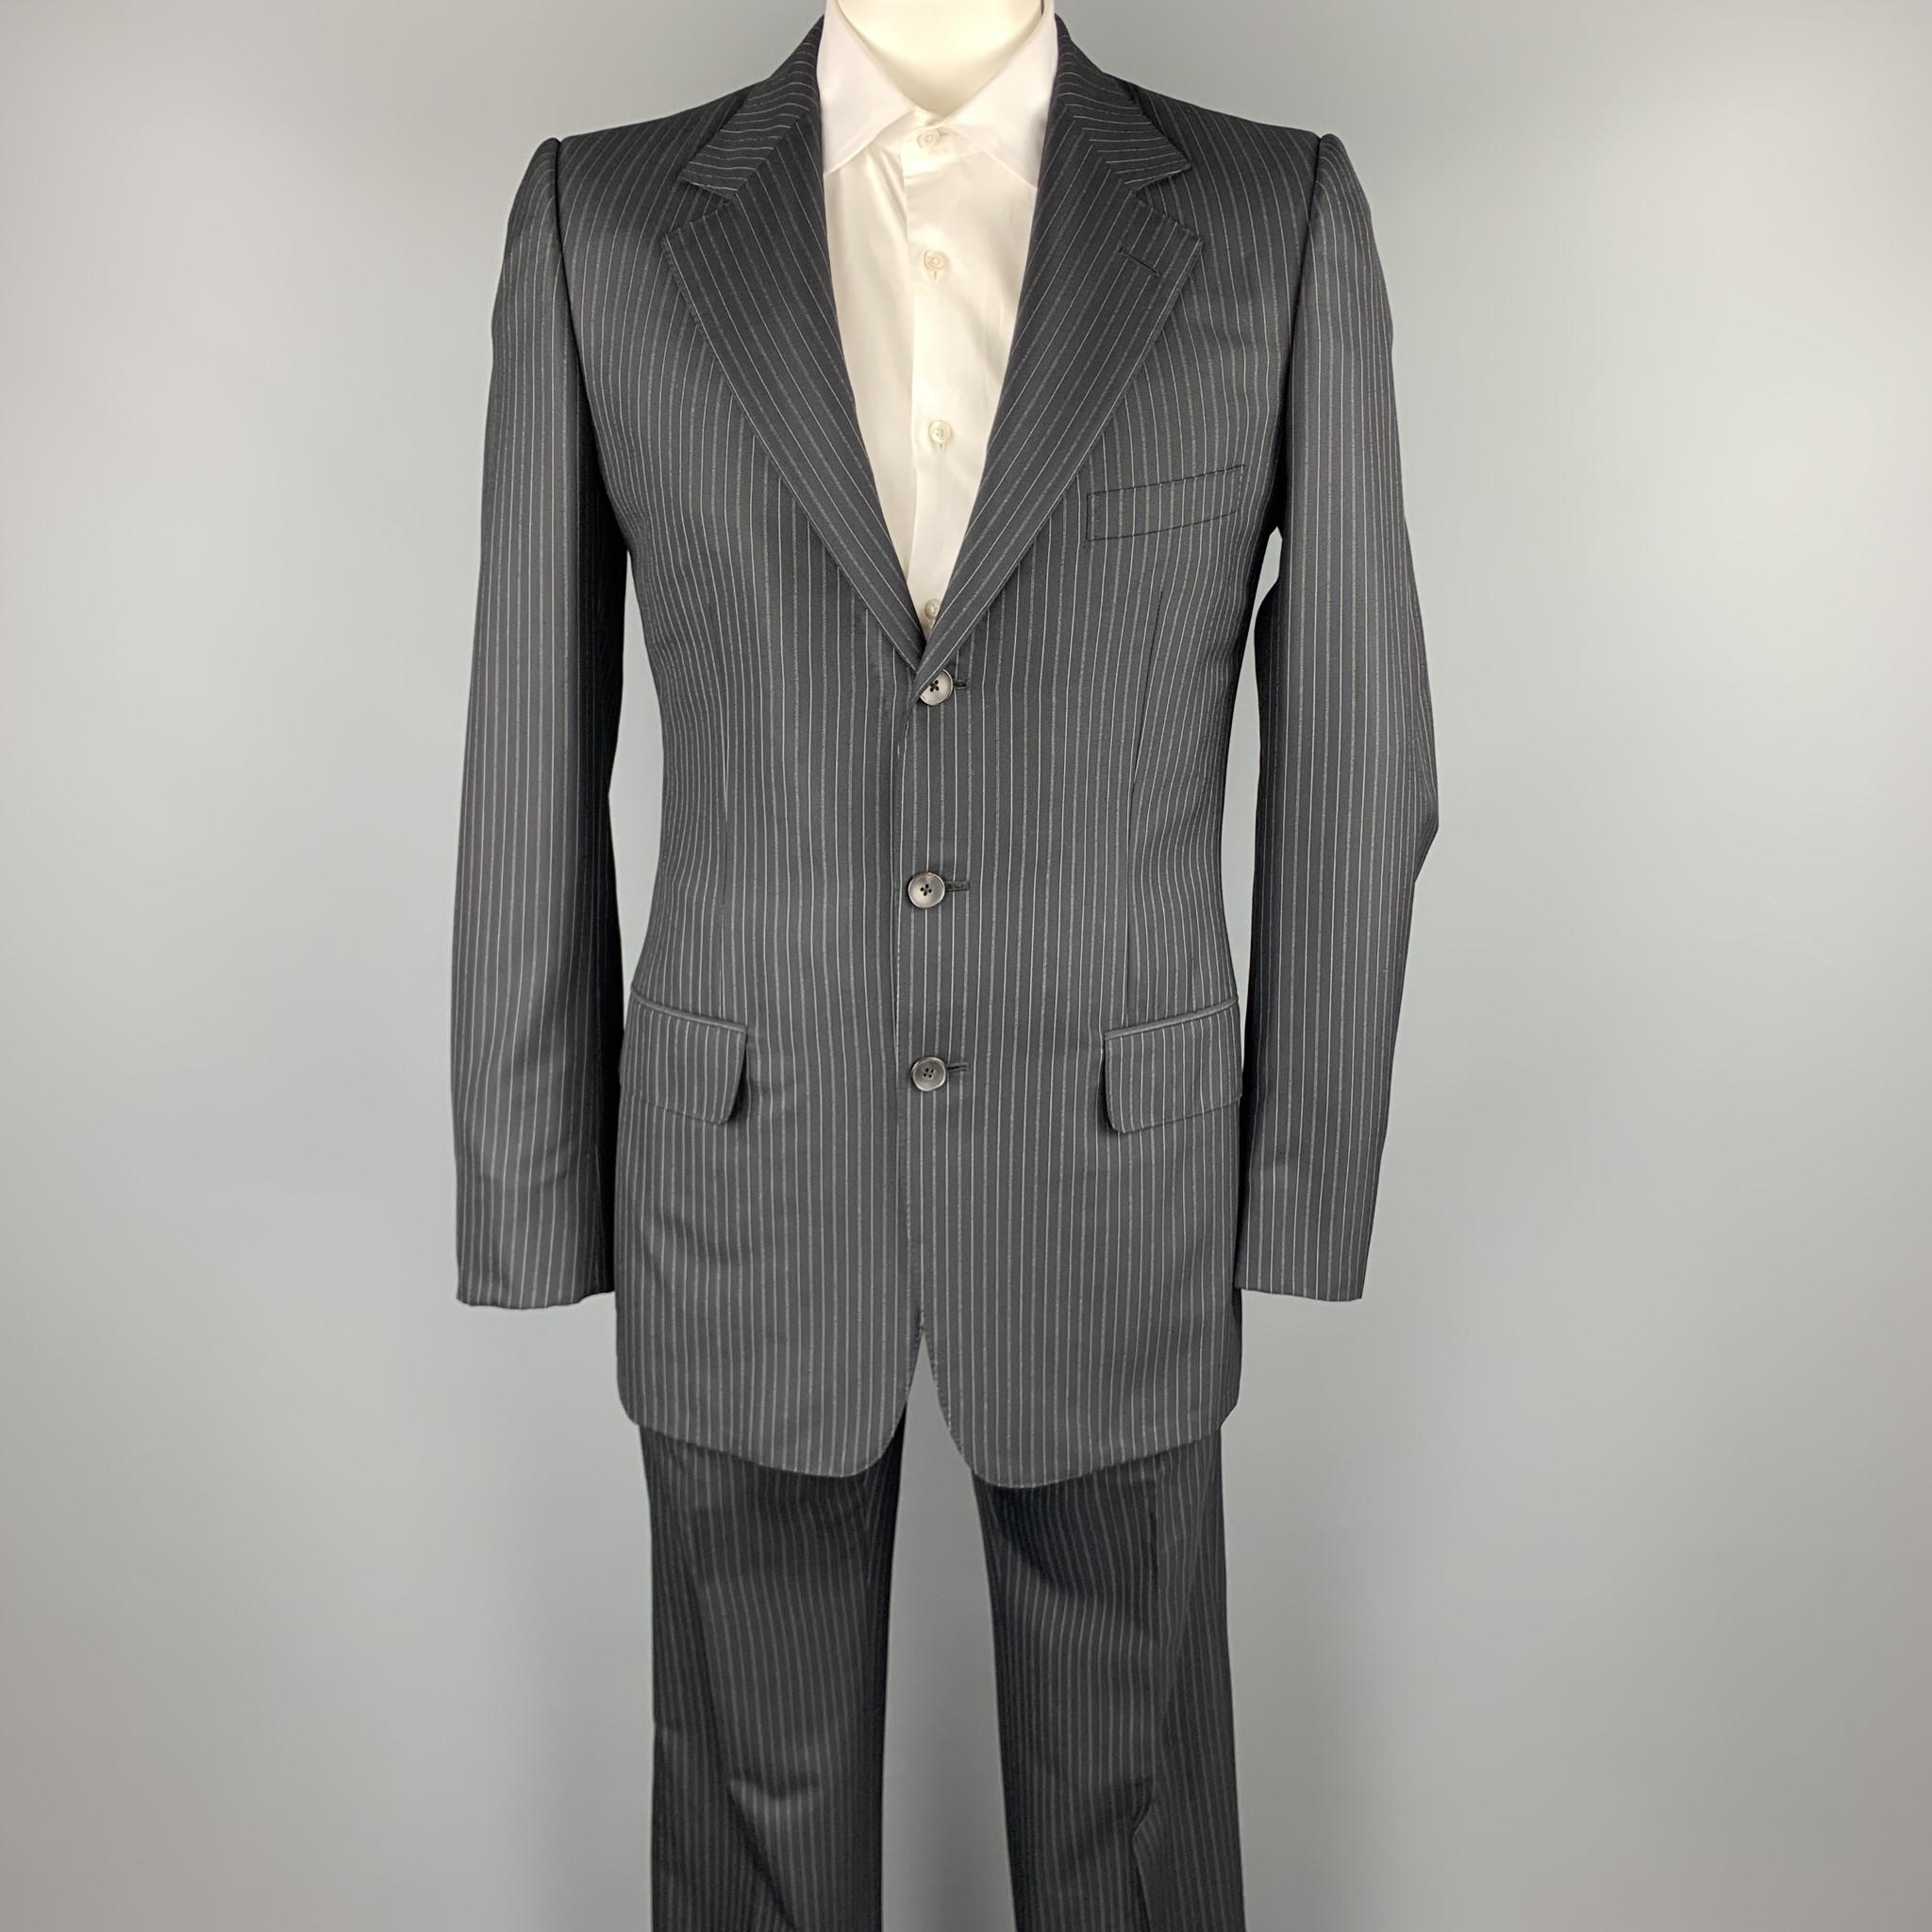 GUCCI long suit comes in a black stripe wool /silk and includes a single breasted, three button sport coat with notch lapel and matching flat front trousers. Made in Italy.

Excellent Pre-Owned Condition.
Marked: 50

Measurements:

-Jacket
Shoulder: